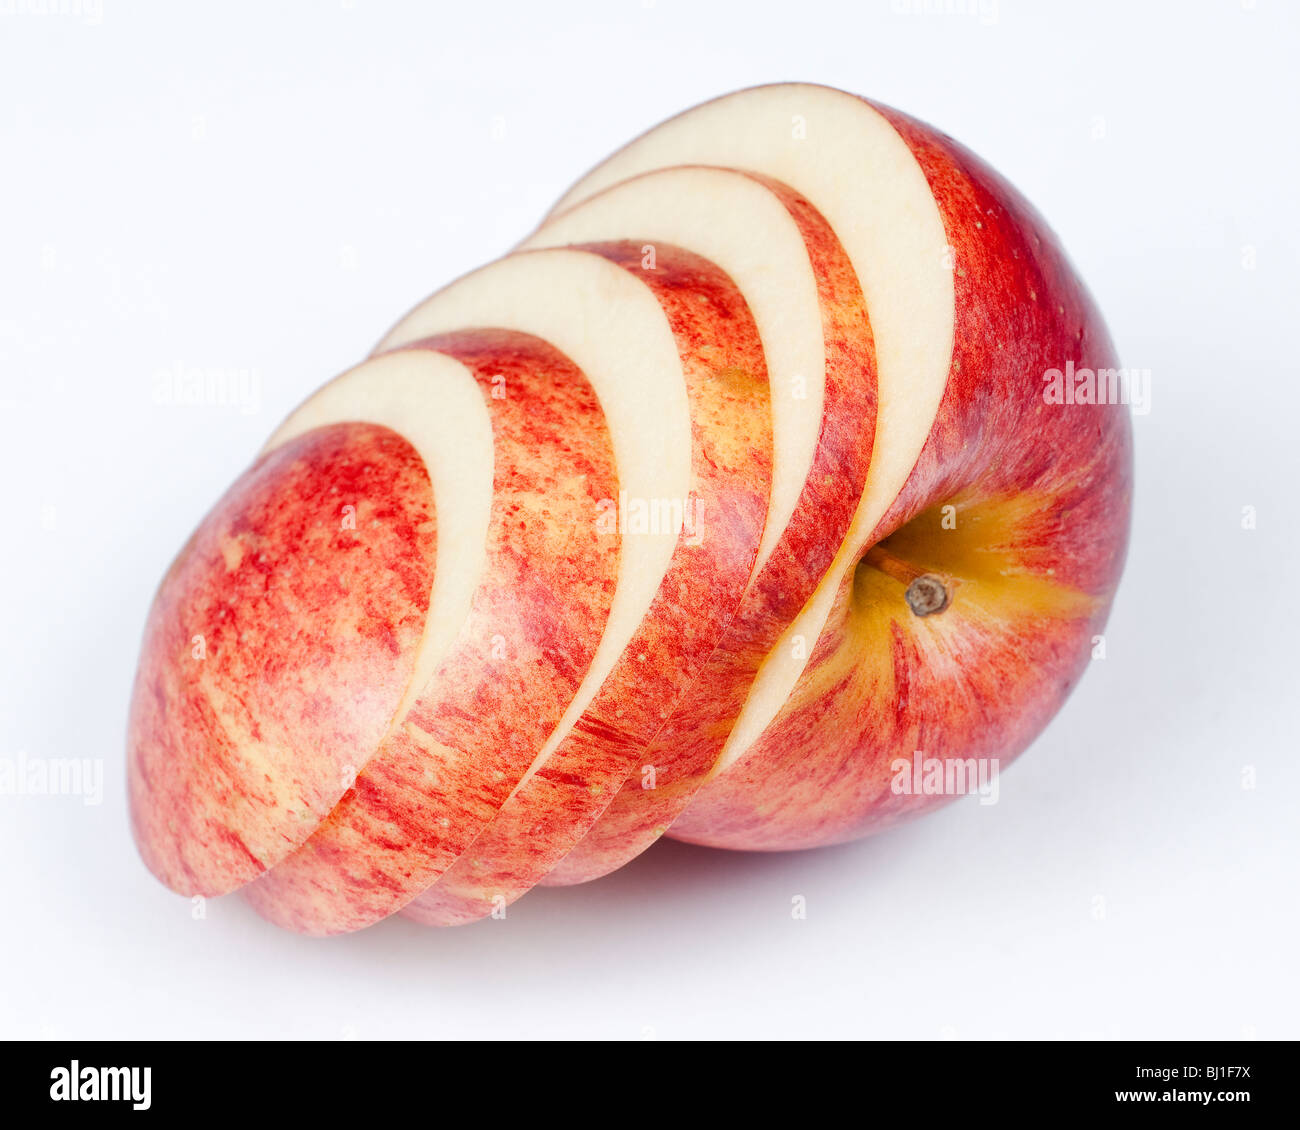 A sliced red apple isolated on white background. Stock Photo